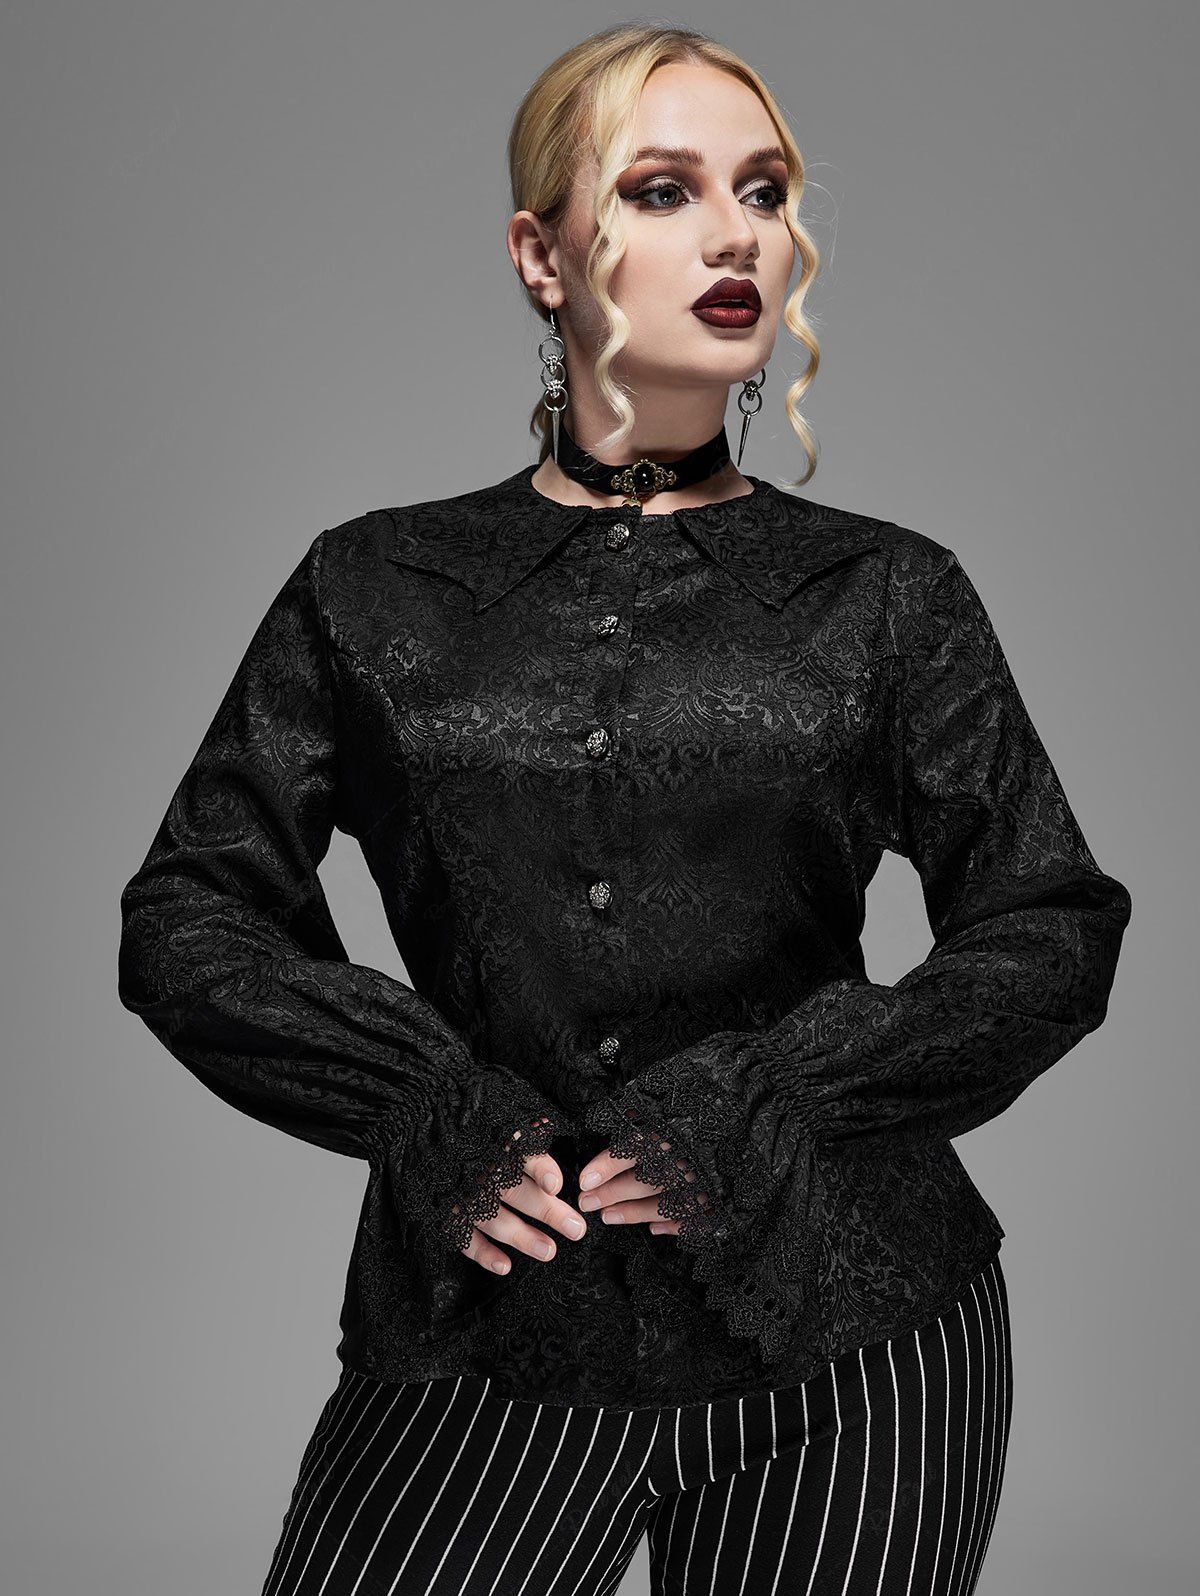 Gothic Floral Embroidered Bat Wing Shape Collar Poet Sleeves Buttons Shirt